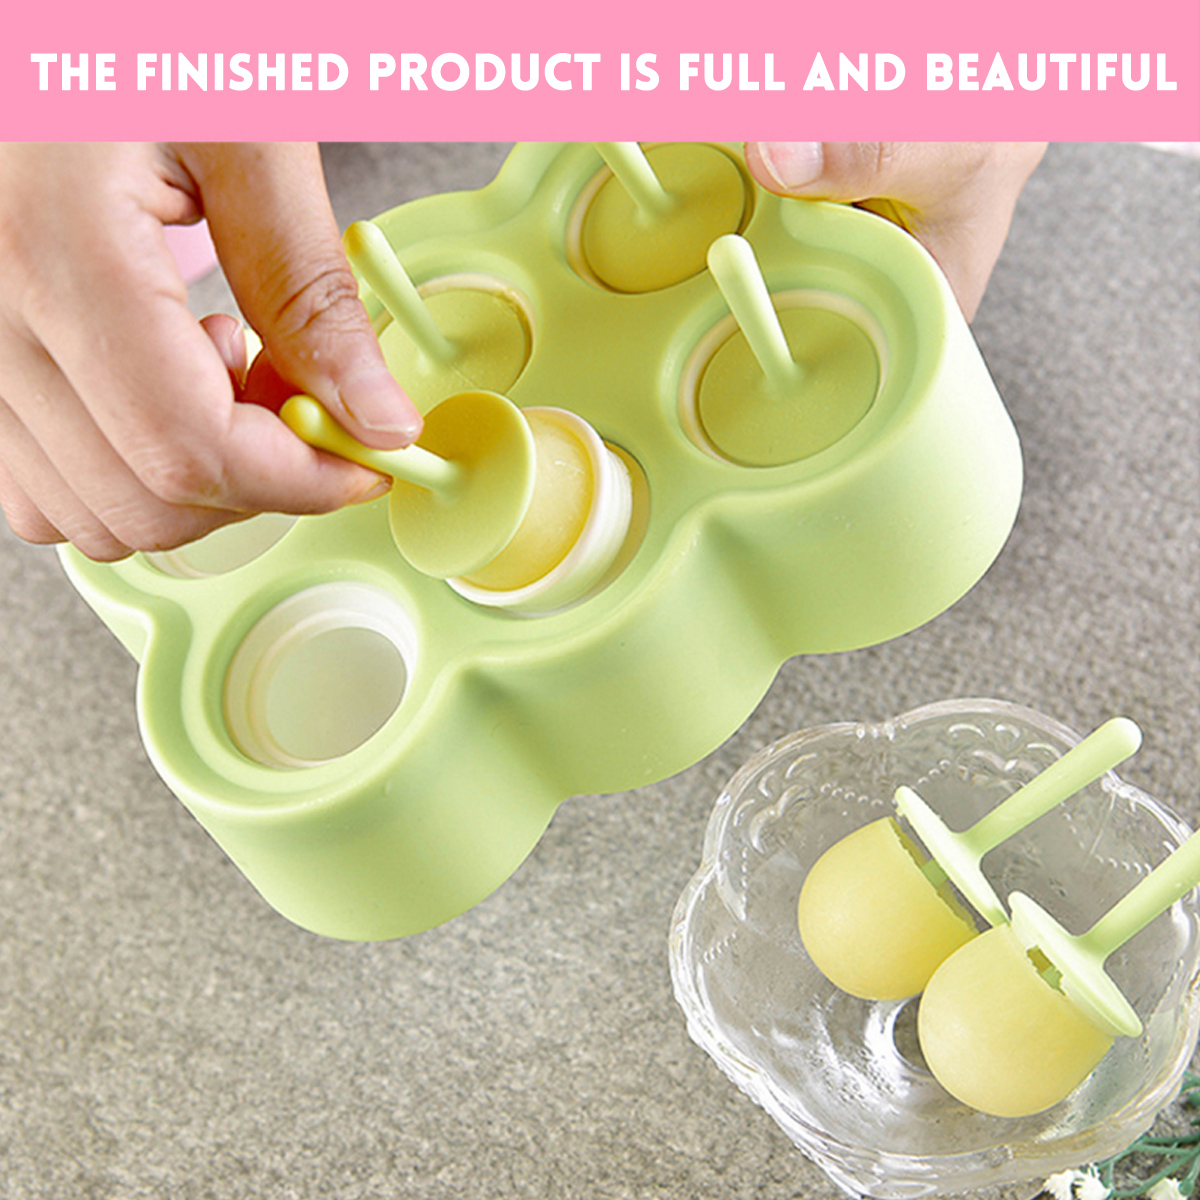 Portable-Food-Grade-Ice-Cream-Mold-Popsicle-Mould-Ball-Maker-Baby-DIY-Food-Supplement-Tools-for-Frui-1811799-2